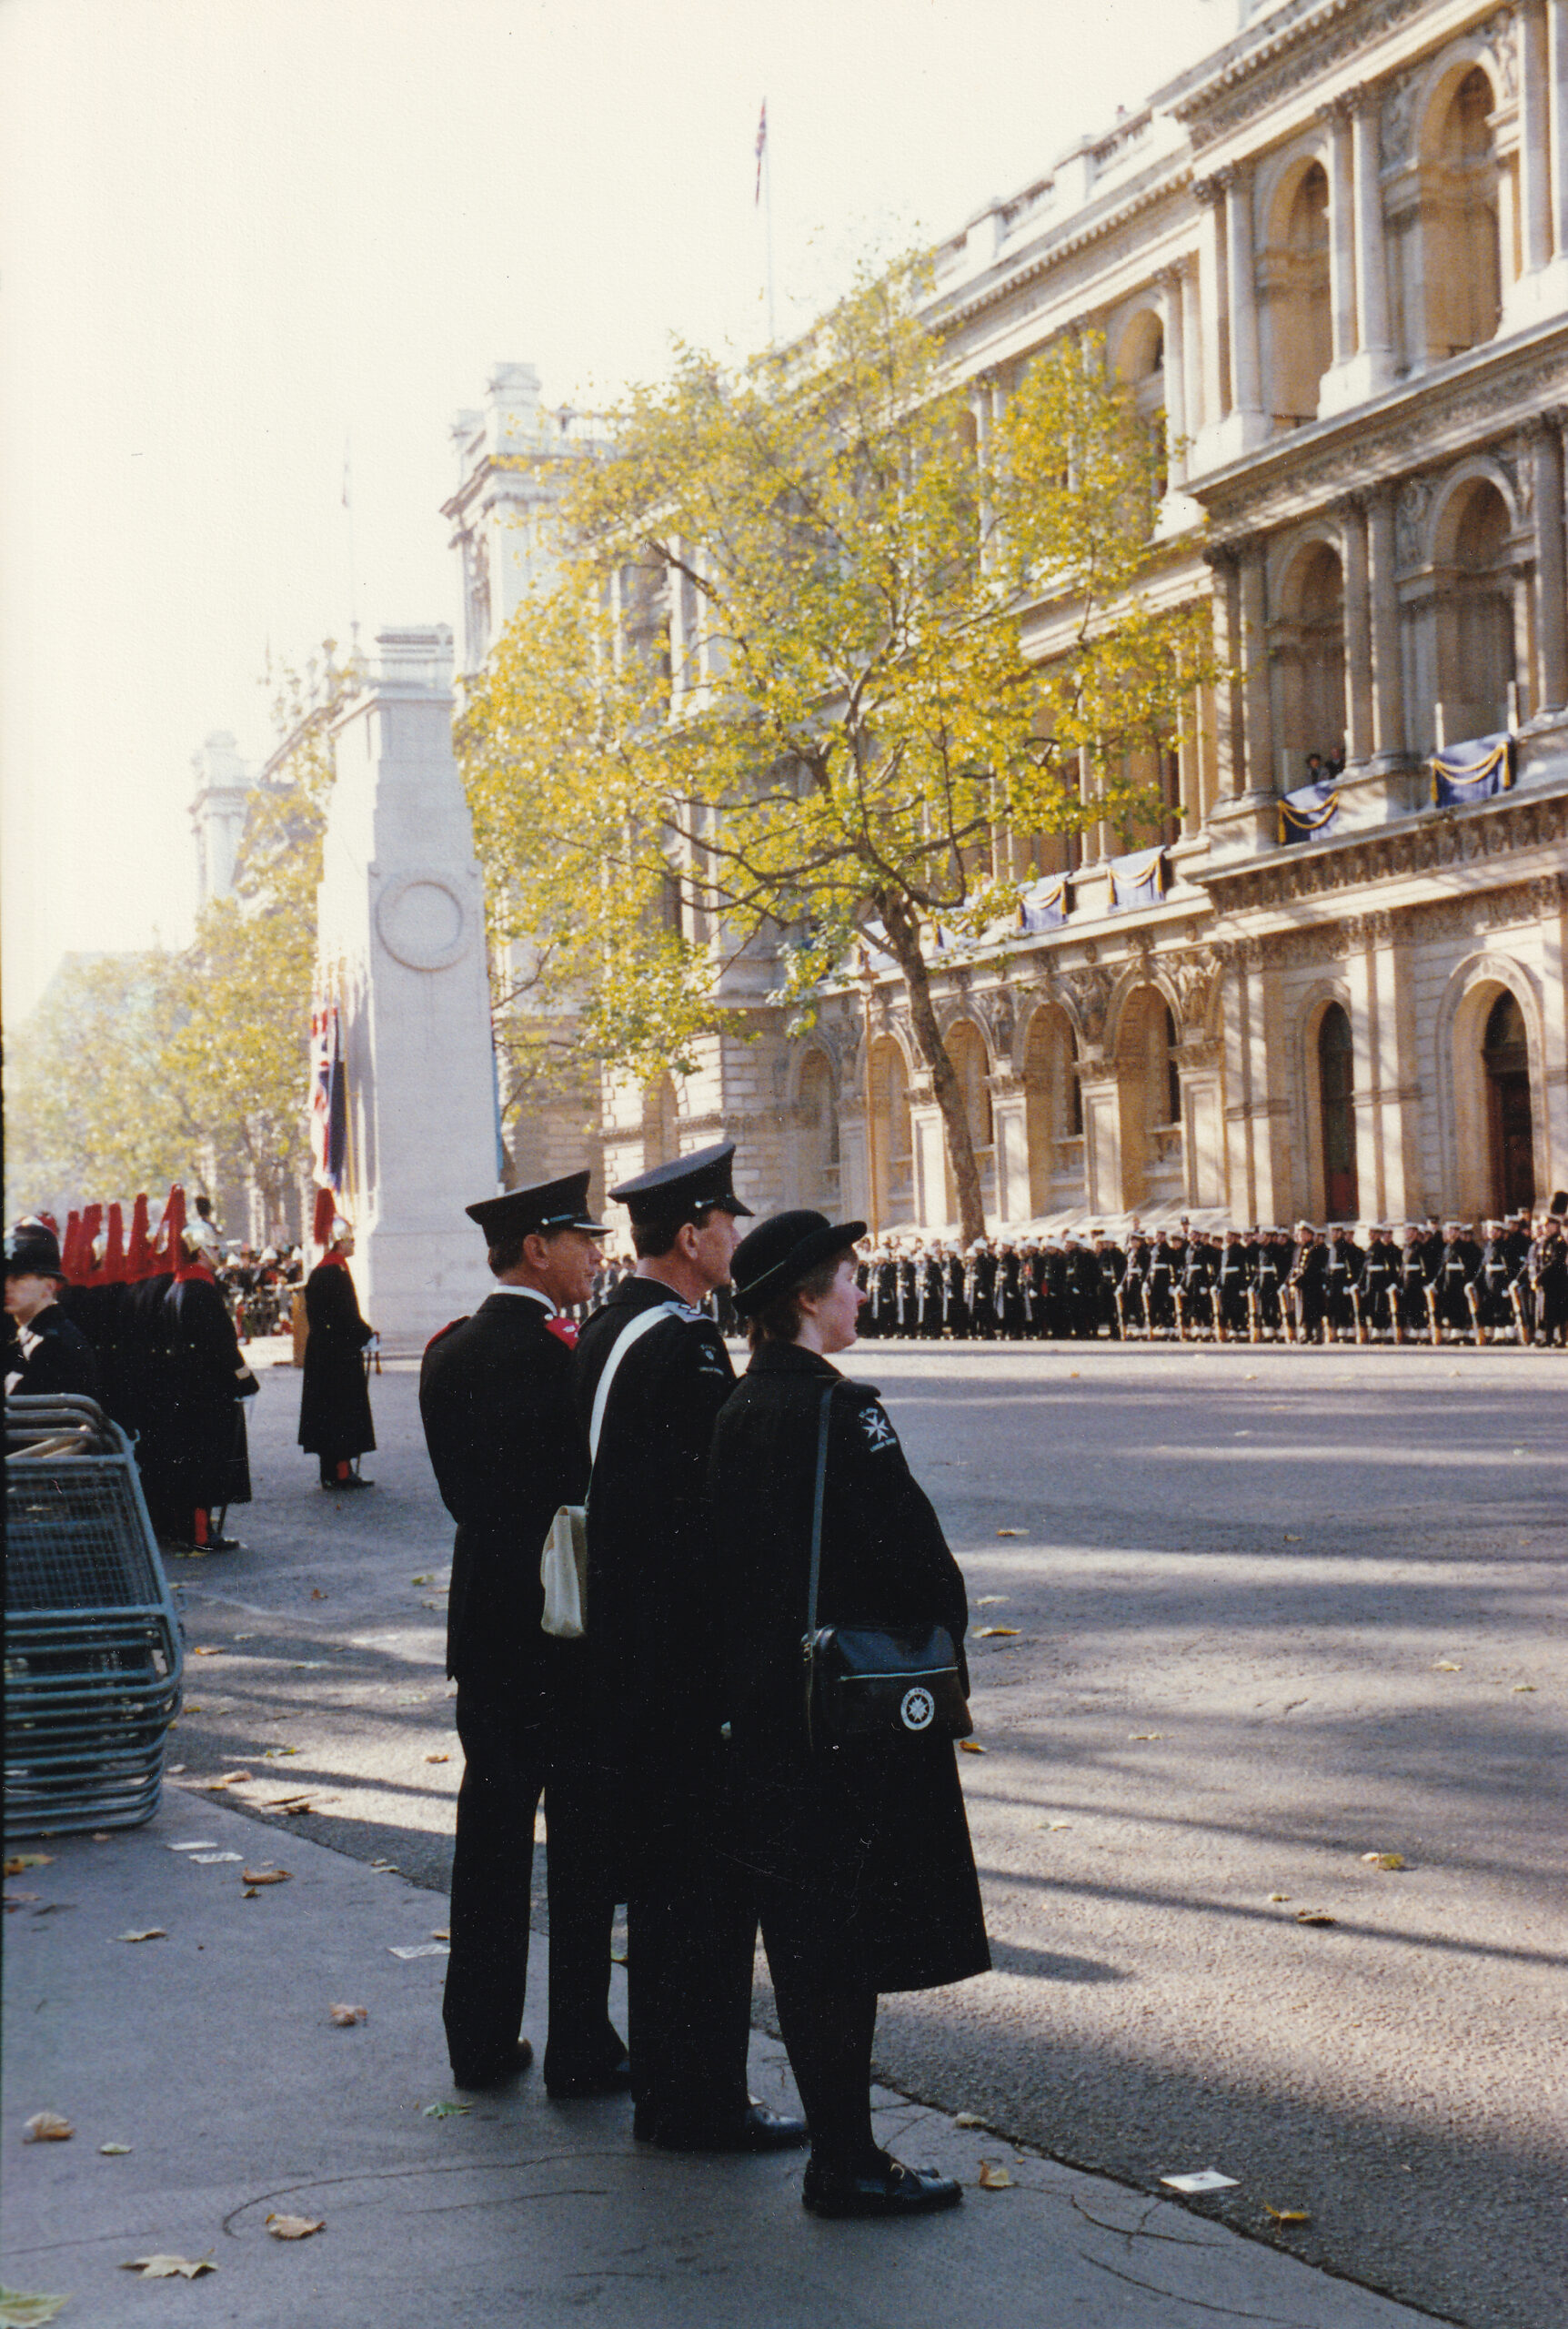 Colour photograph of three people in St John uniform lining the roadside. Behind them is the cenotaph along with lines of other people in official uniforms.